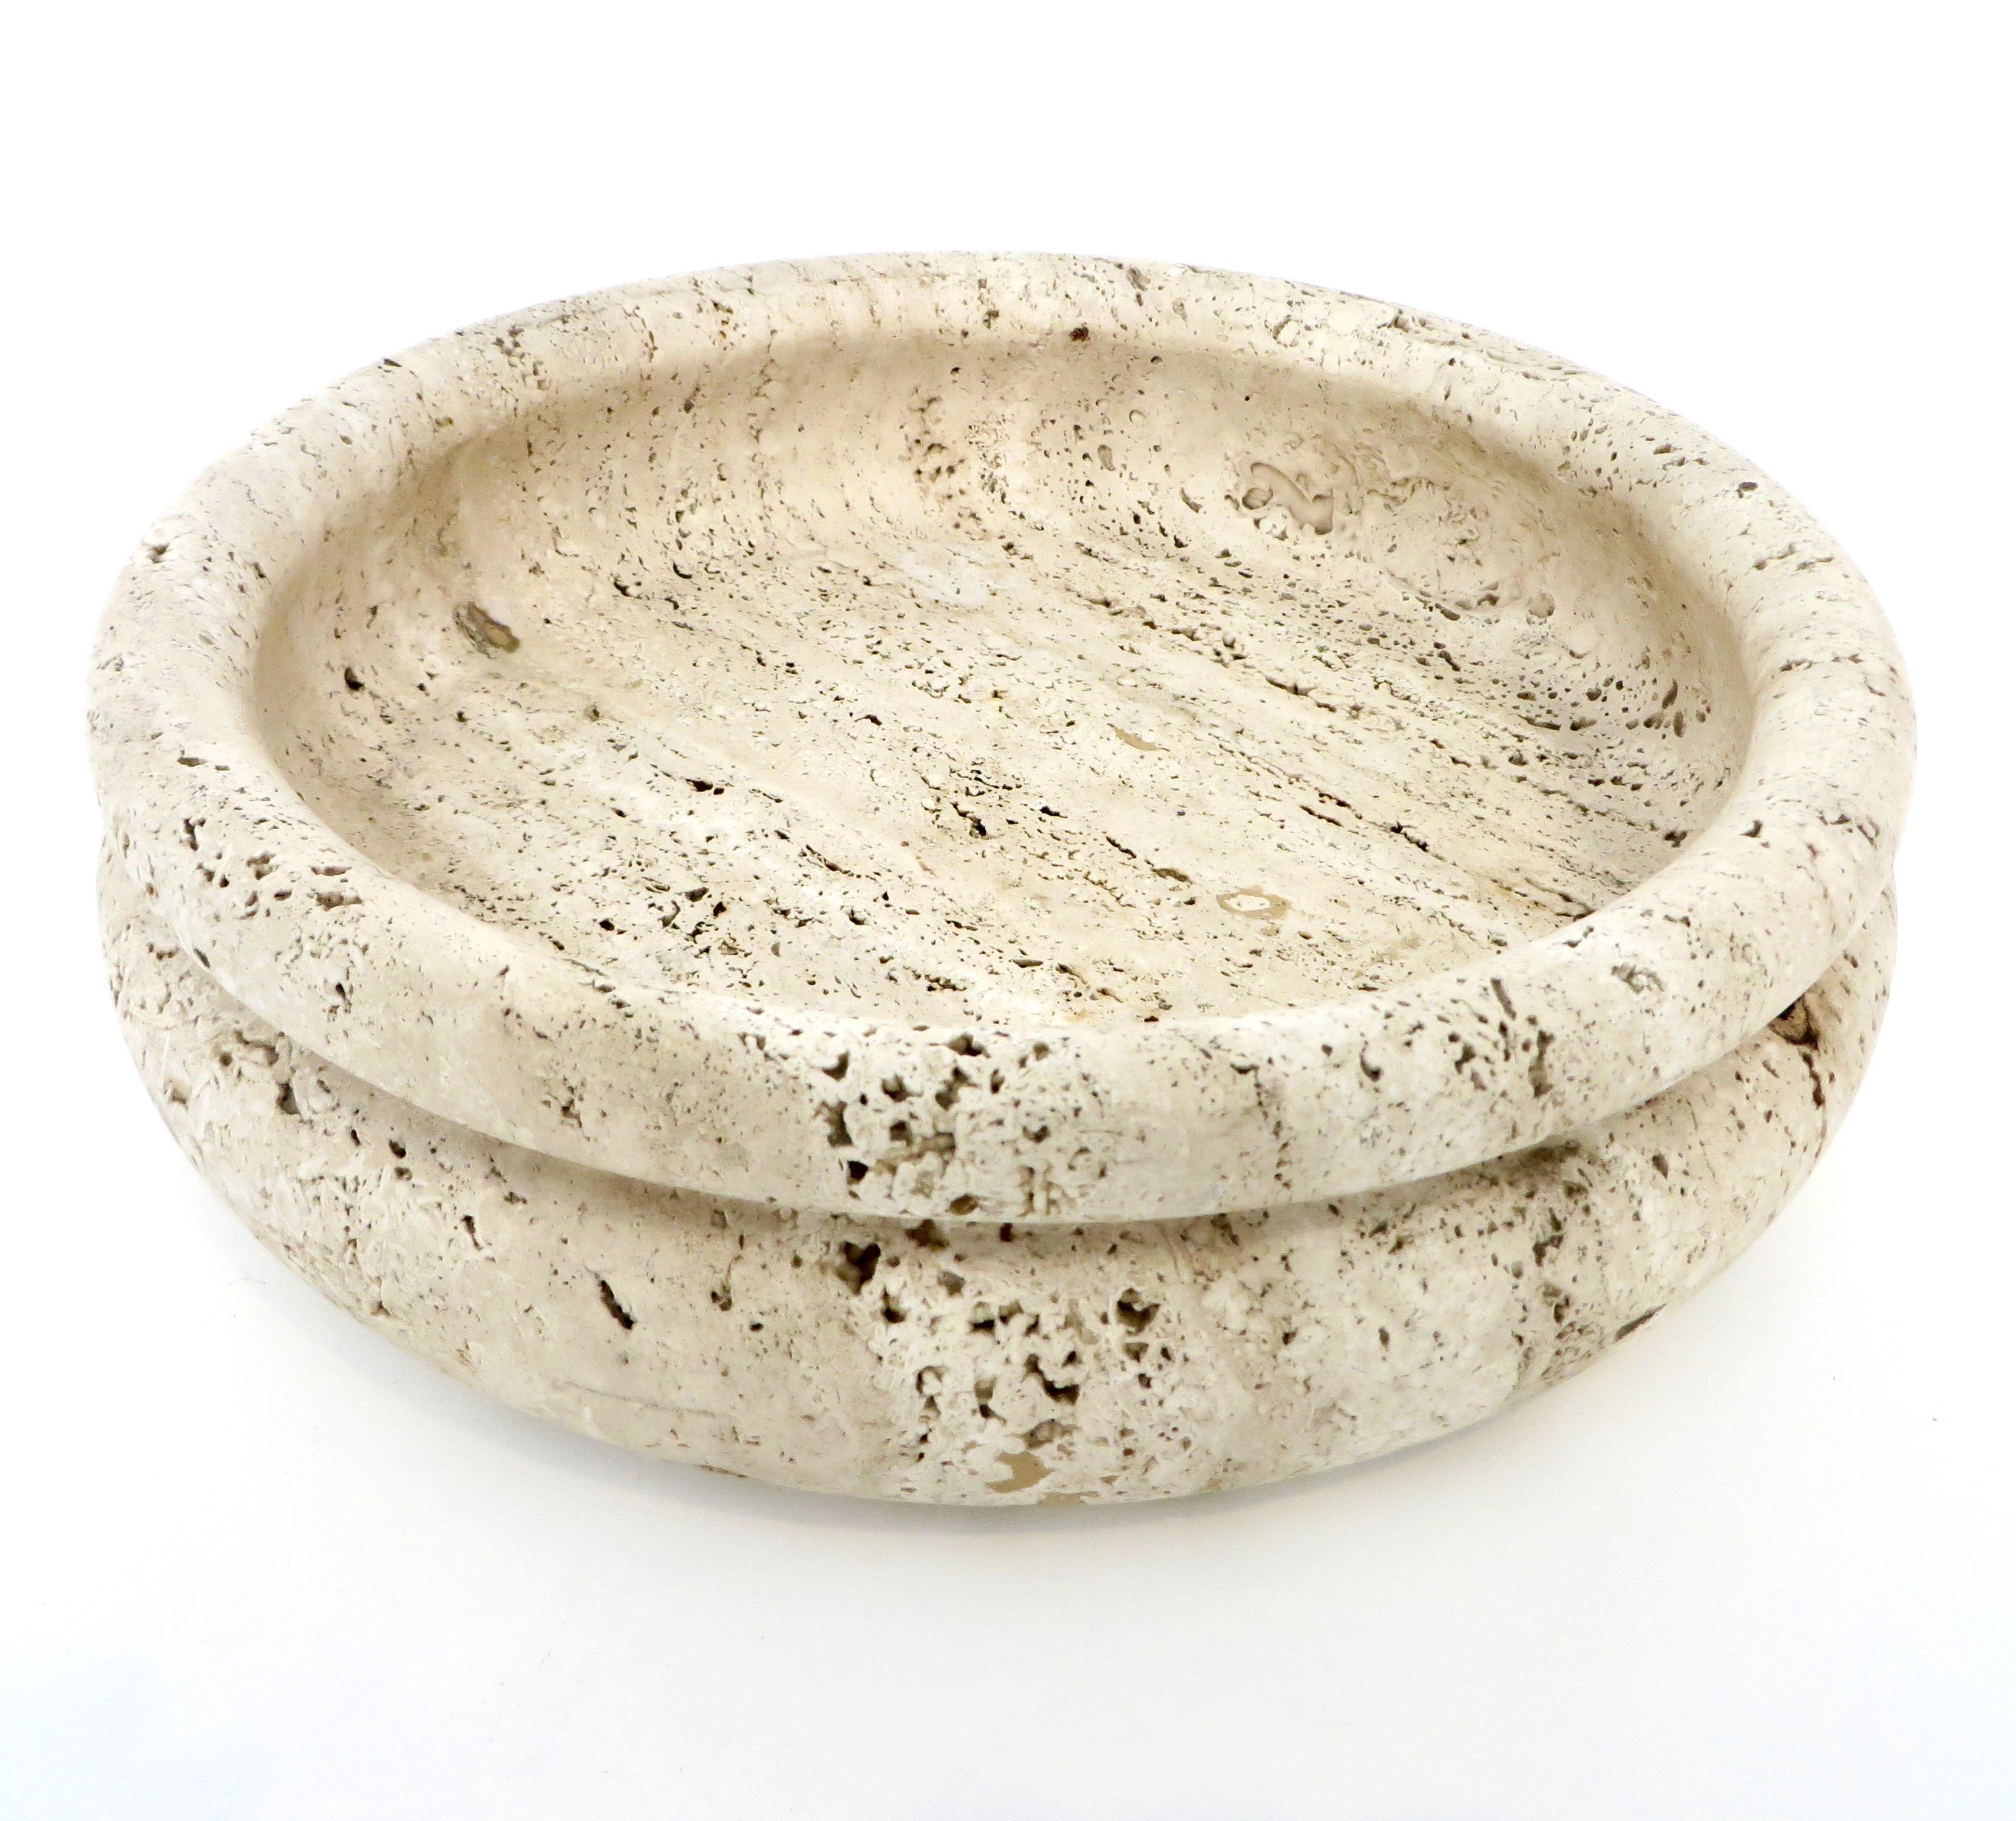 Monumental Italian Travertine Marble Bowl or Dish for Up & Up Di Rosa and Giusti 1